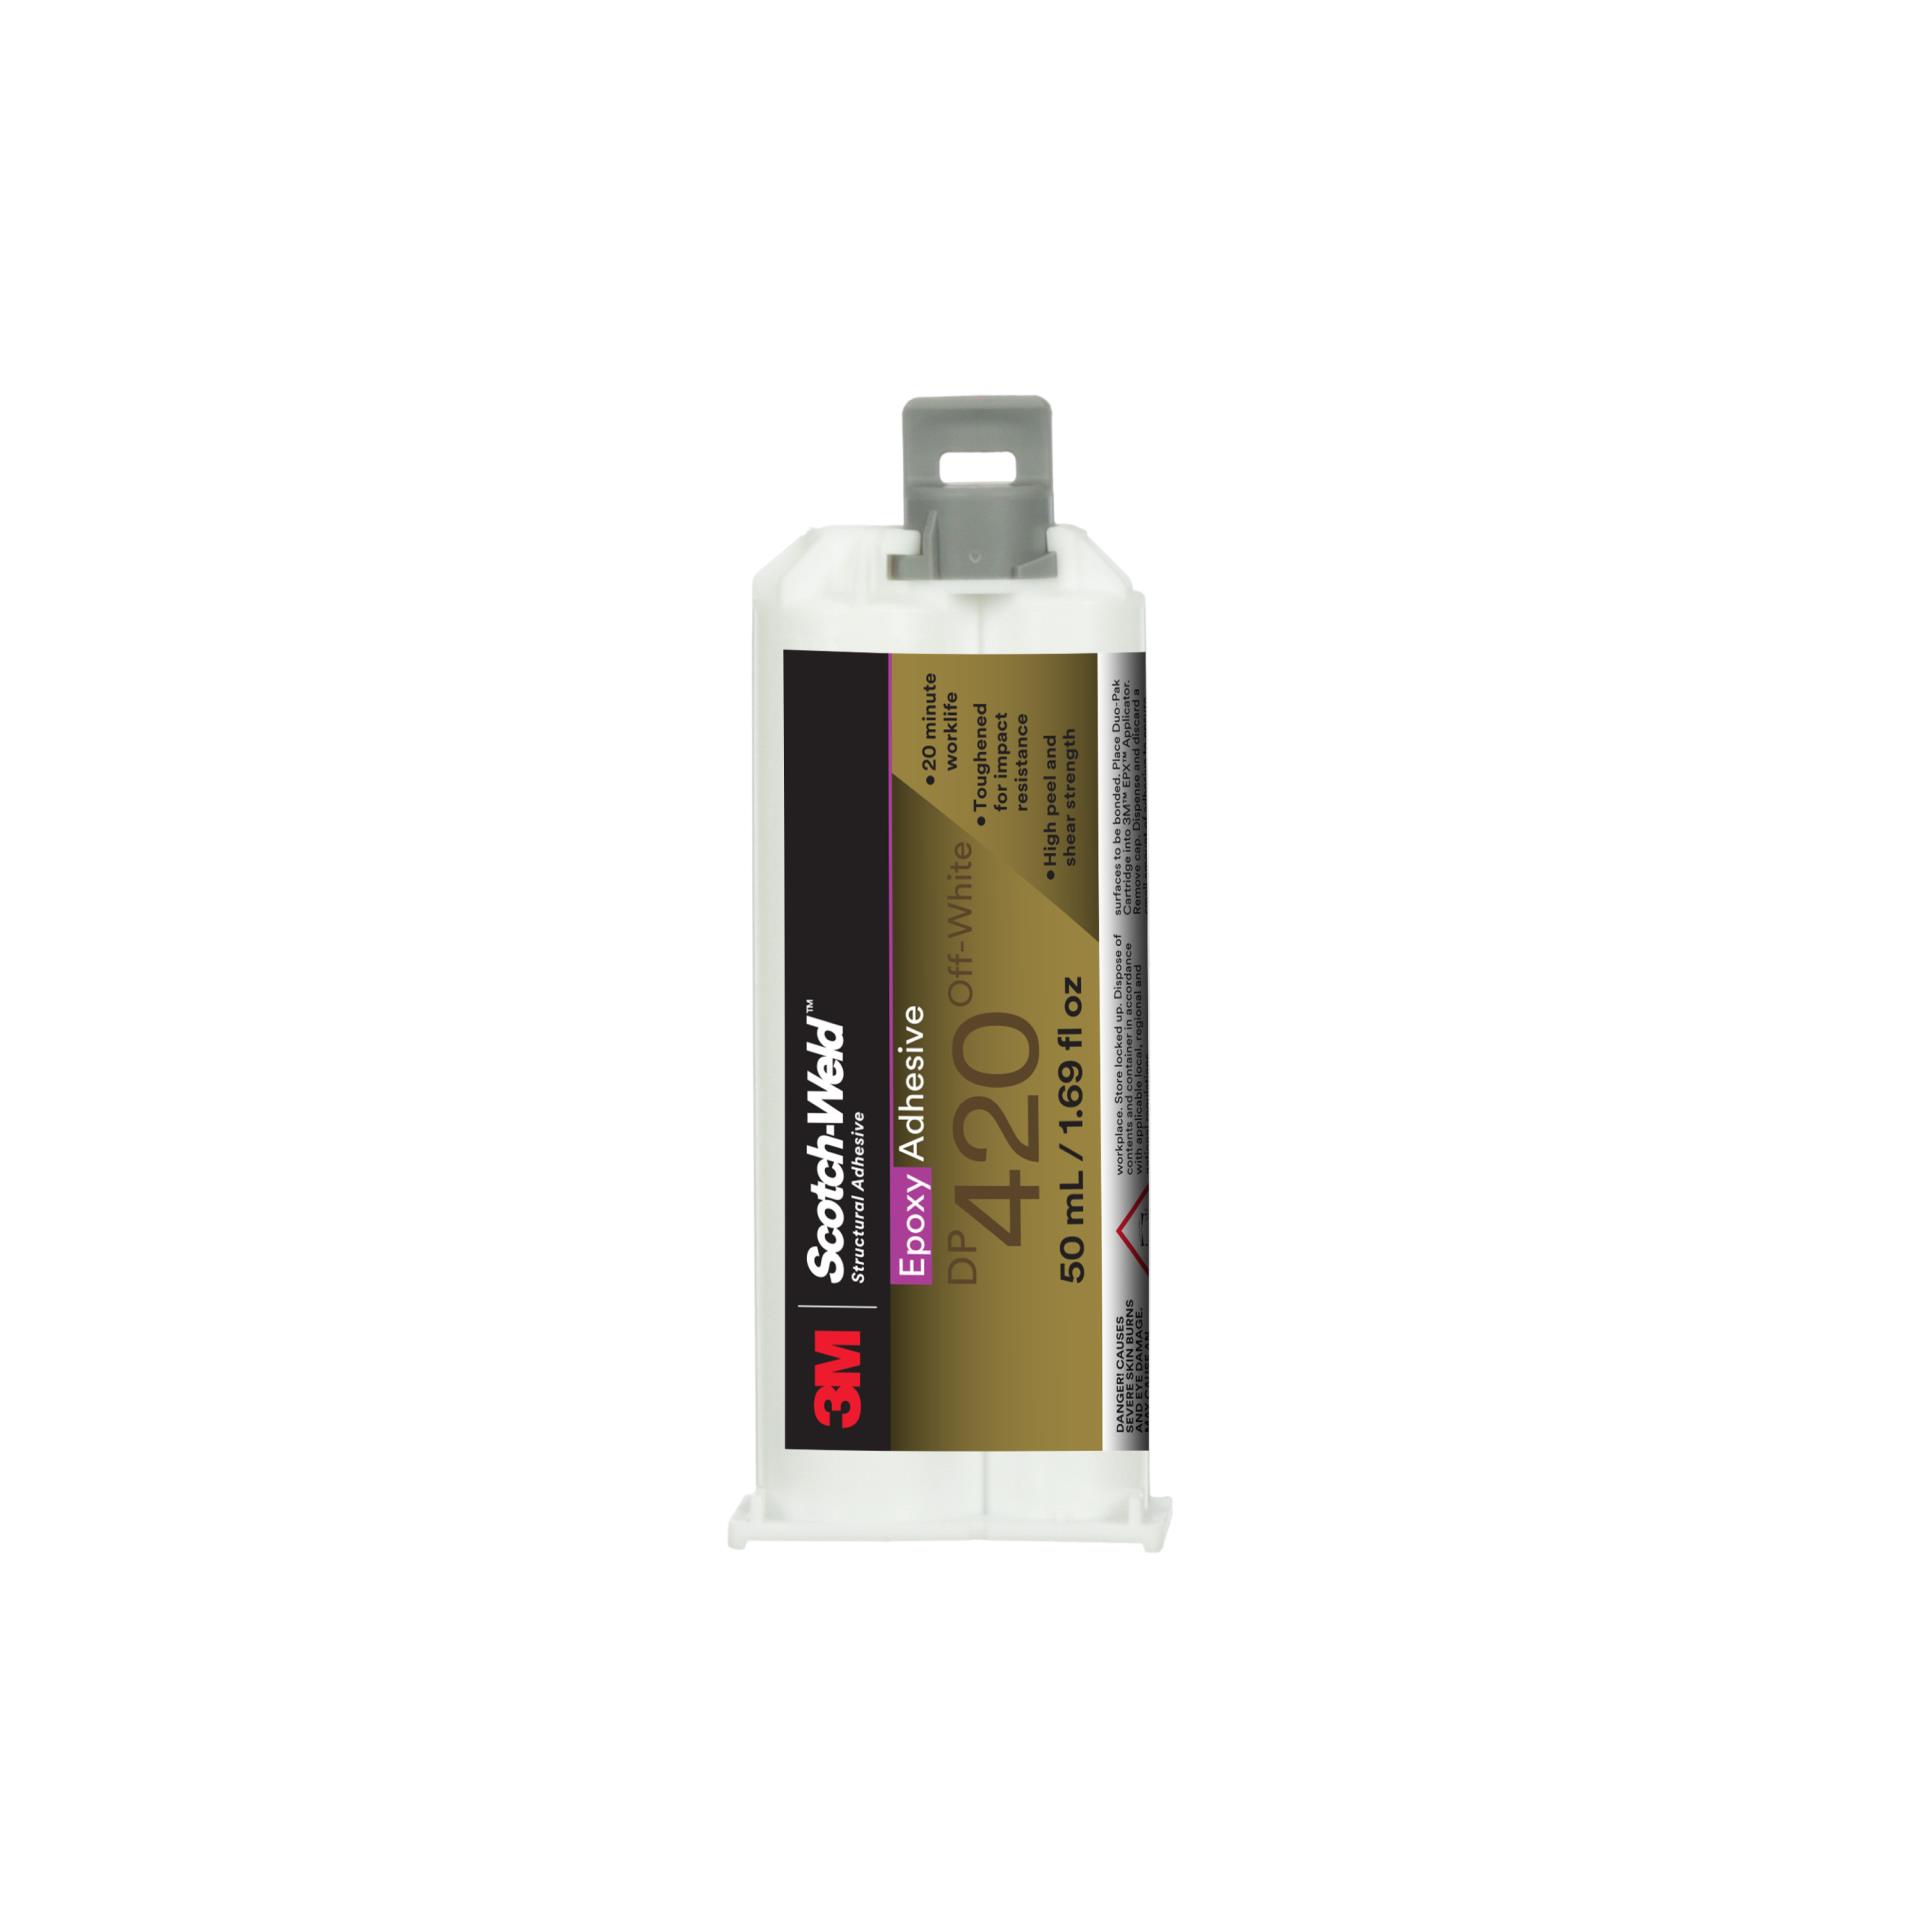 https://www.e-aircraftsupply.com/ItemImages/36/7100148736_3M_Scotch-Weld_Epoxy_Adhesive_DP420_Off-White.jpg